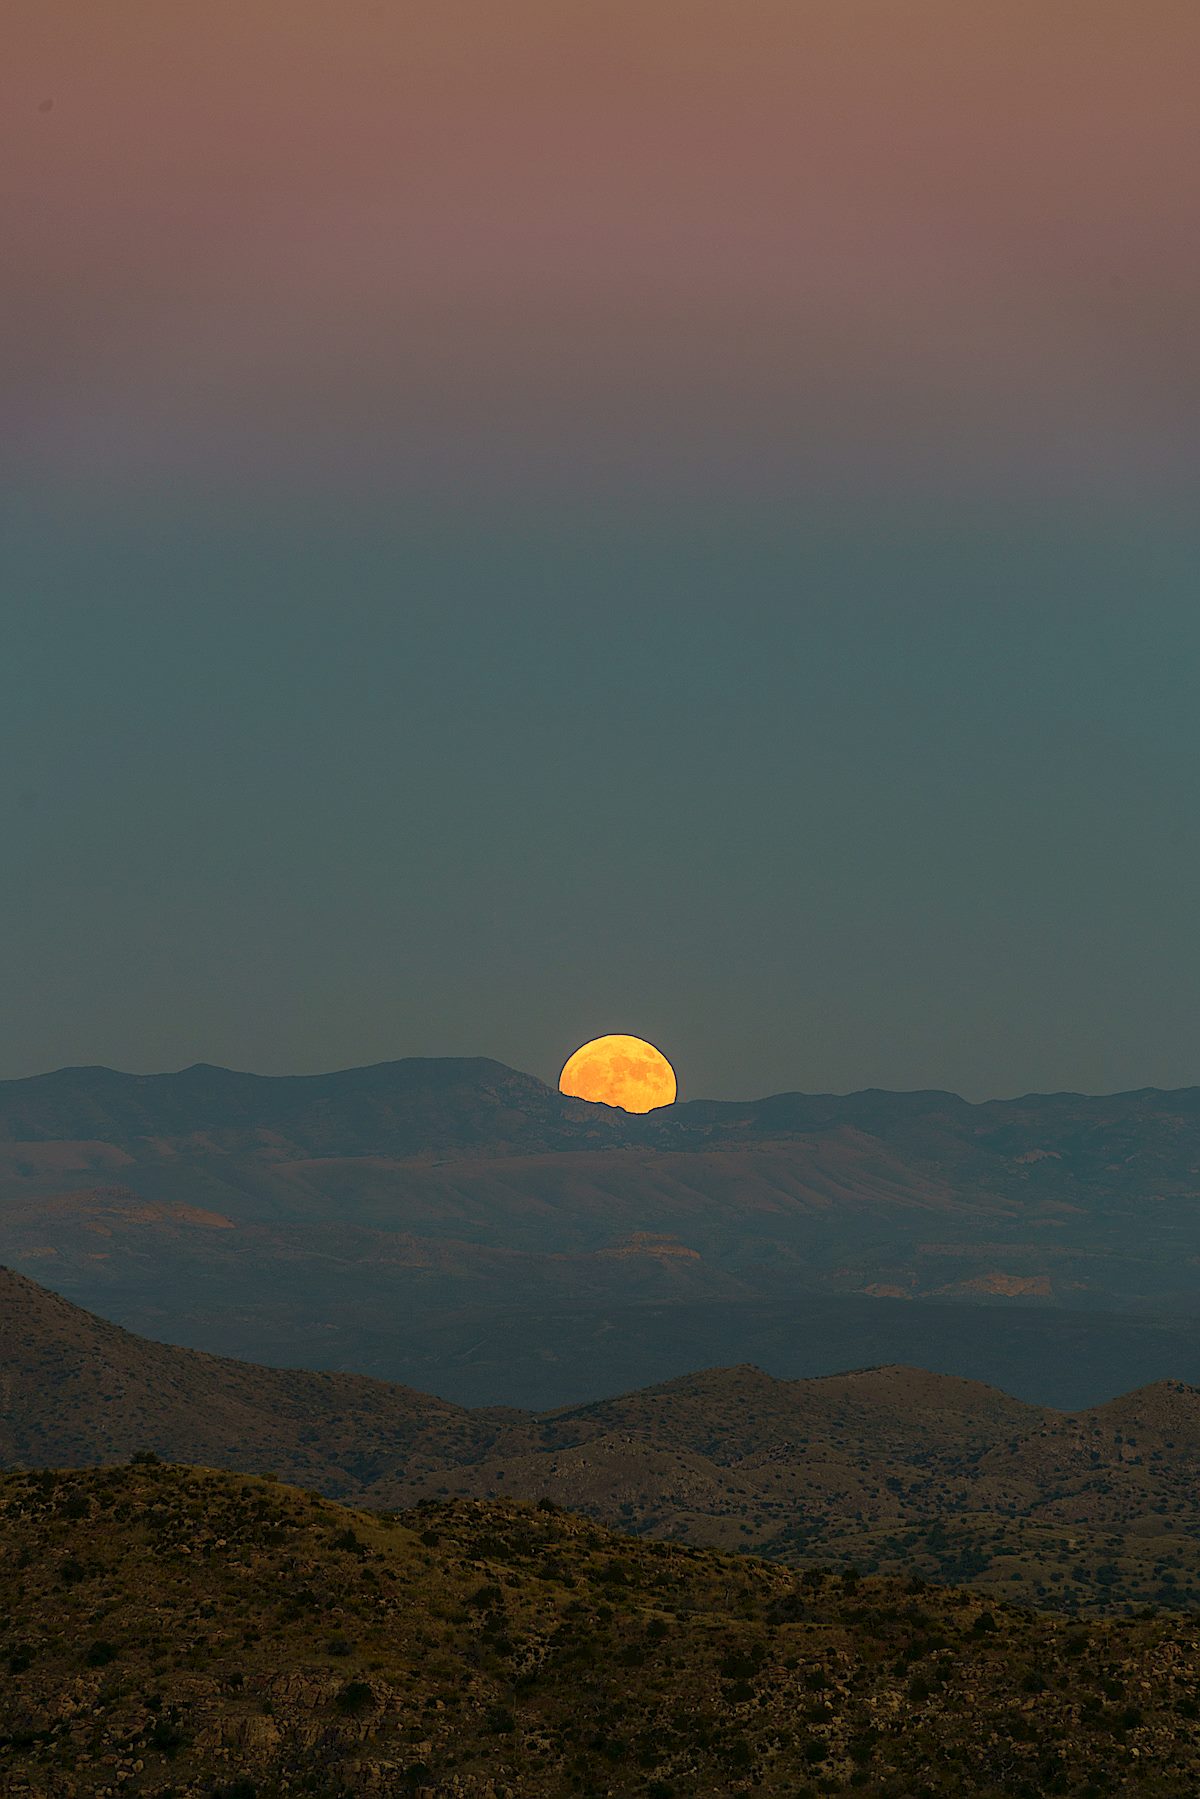 A Hunter's Moon rising over the Galiuro Mountains from just off the Bellota Trail on the ridge above Molino Basin. October 2016